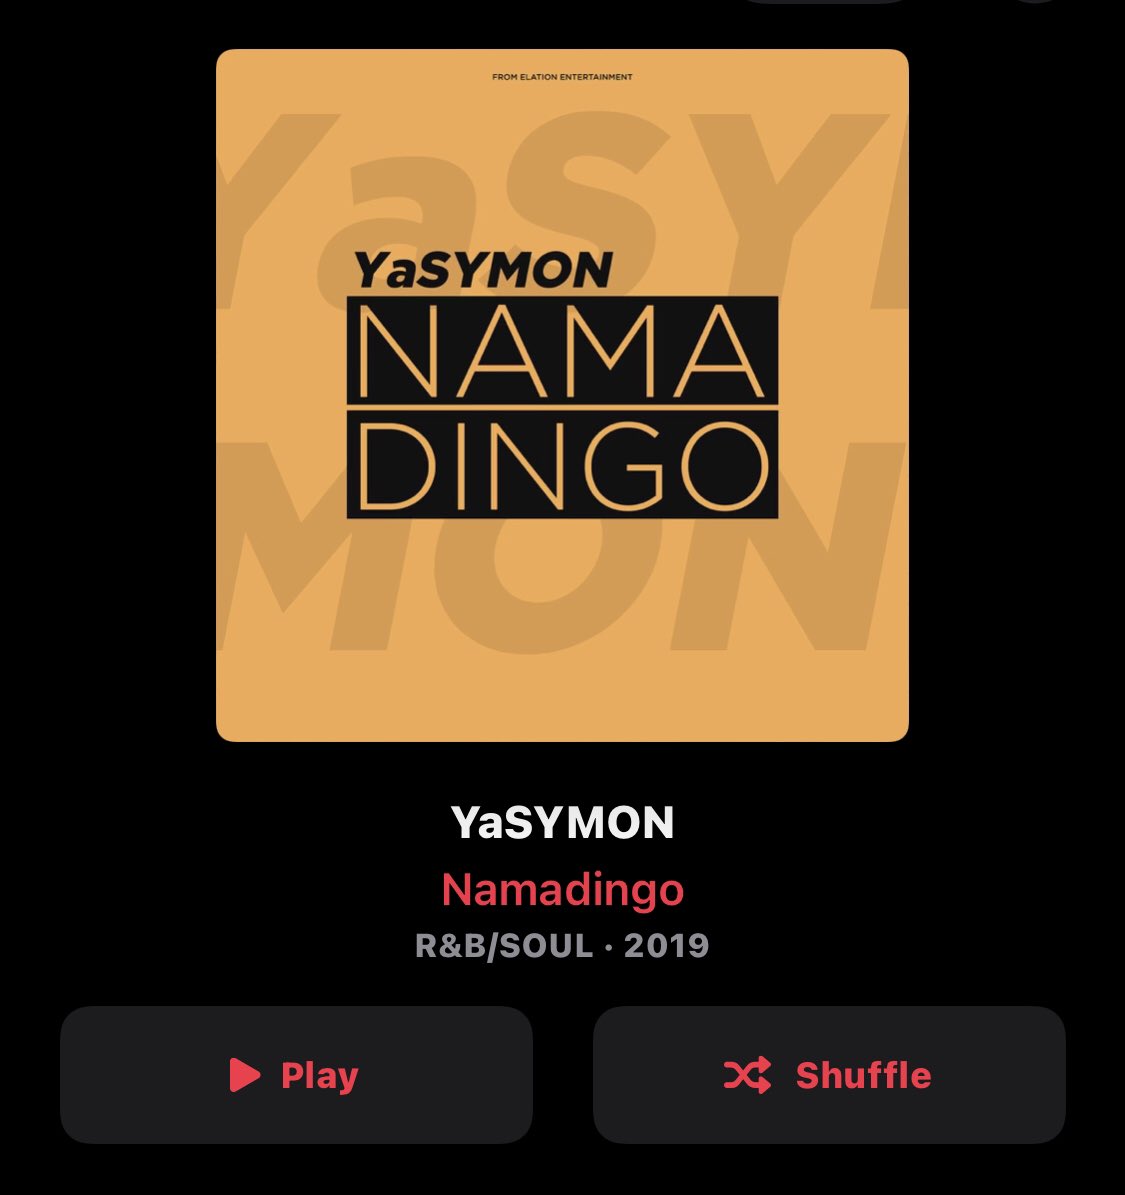 Patience Namadingo is a bit of an outlier who seems to be constantly pushing boundaries in his music. I love it! I would place his sound in Afro Pop, maybe Afro Soul.He also dips a bit into reggae. Beautiful voice as well. He sings with that beautiful desperation I enjoy in